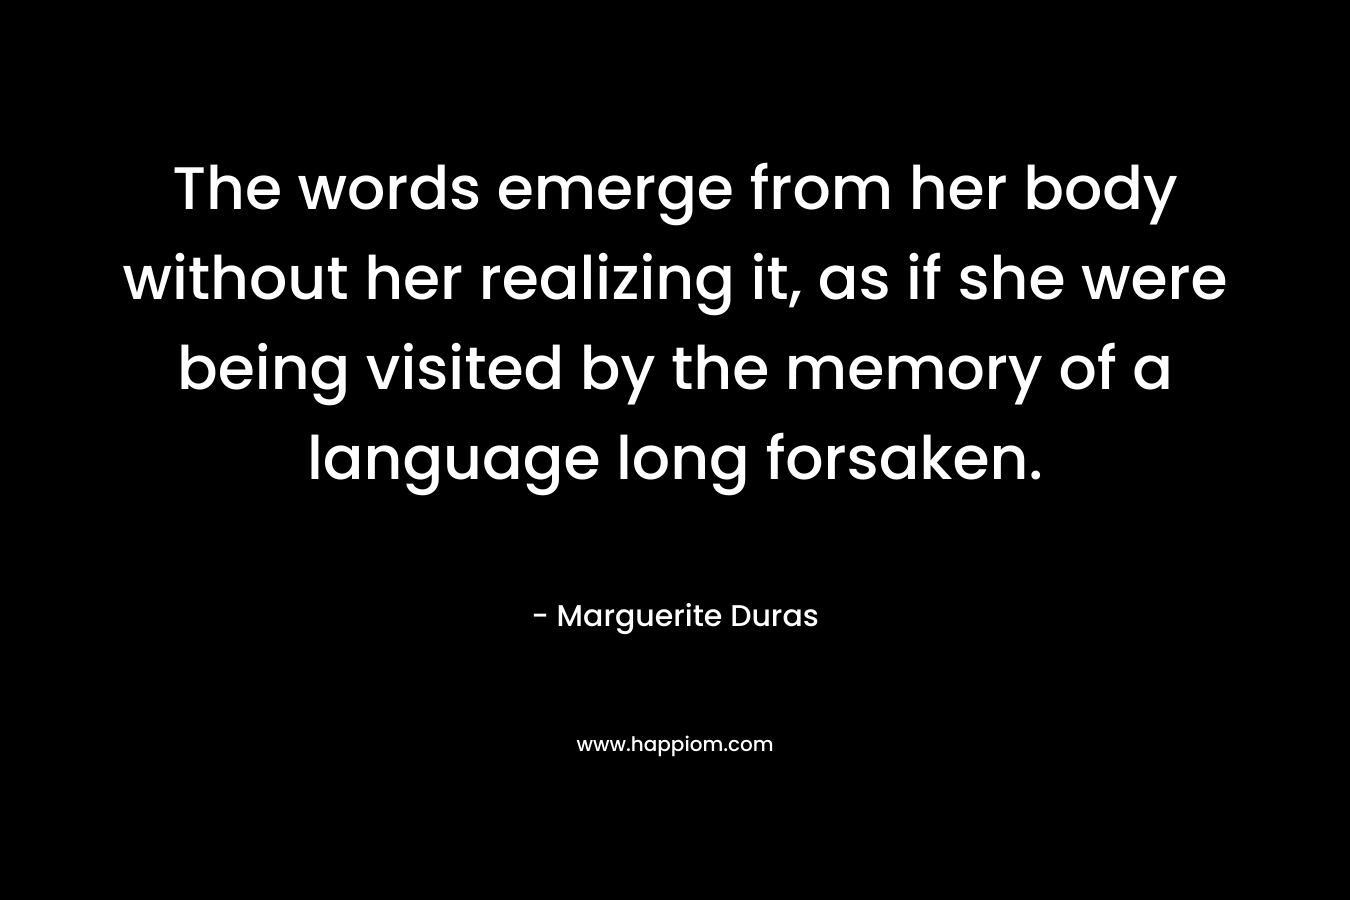 The words emerge from her body without her realizing it, as if she were being visited by the memory of a language long forsaken.